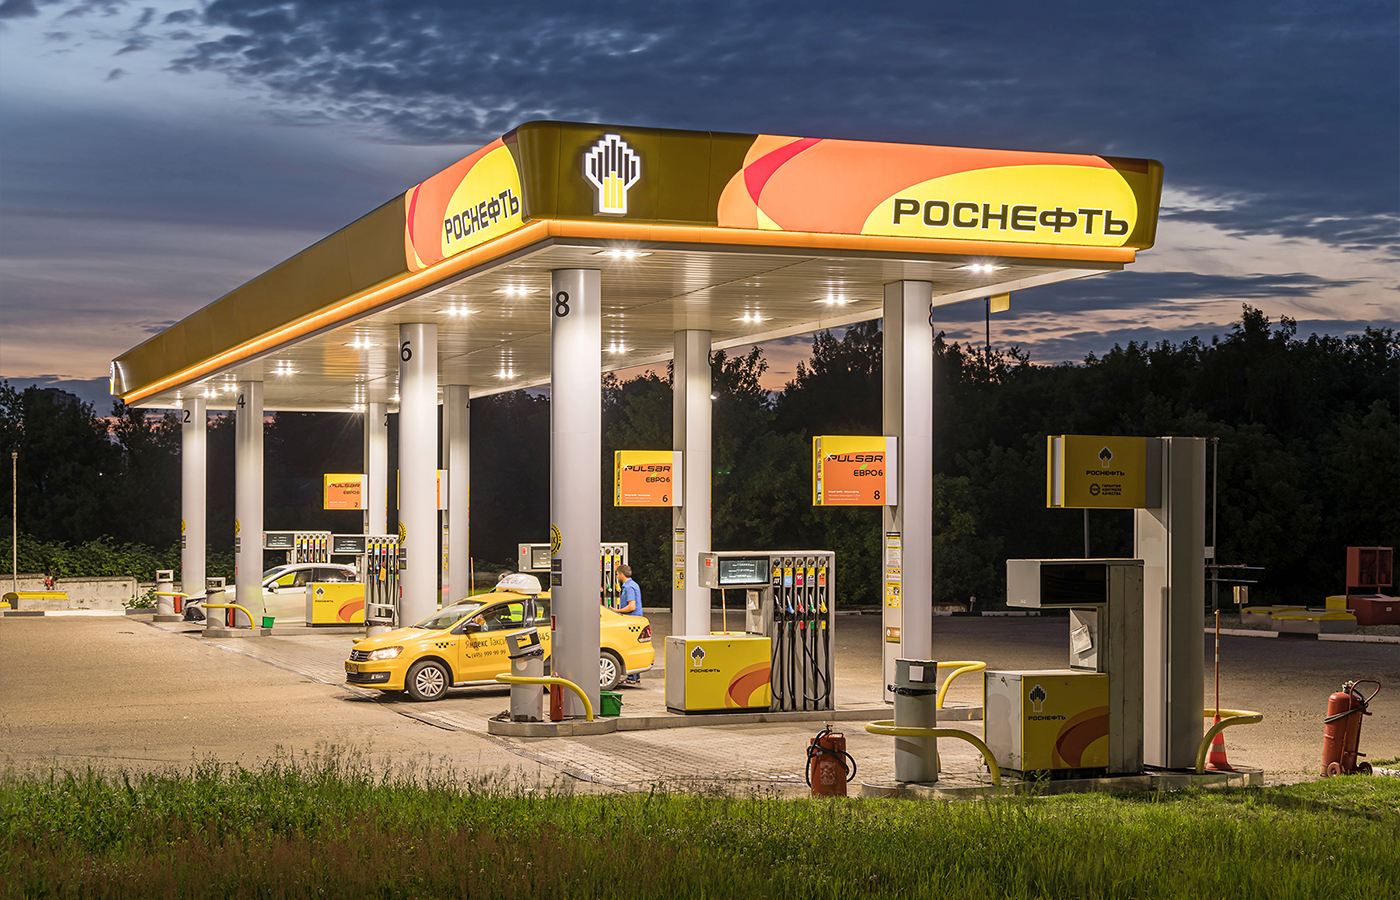 Night view of a canopy Rosneft filling station